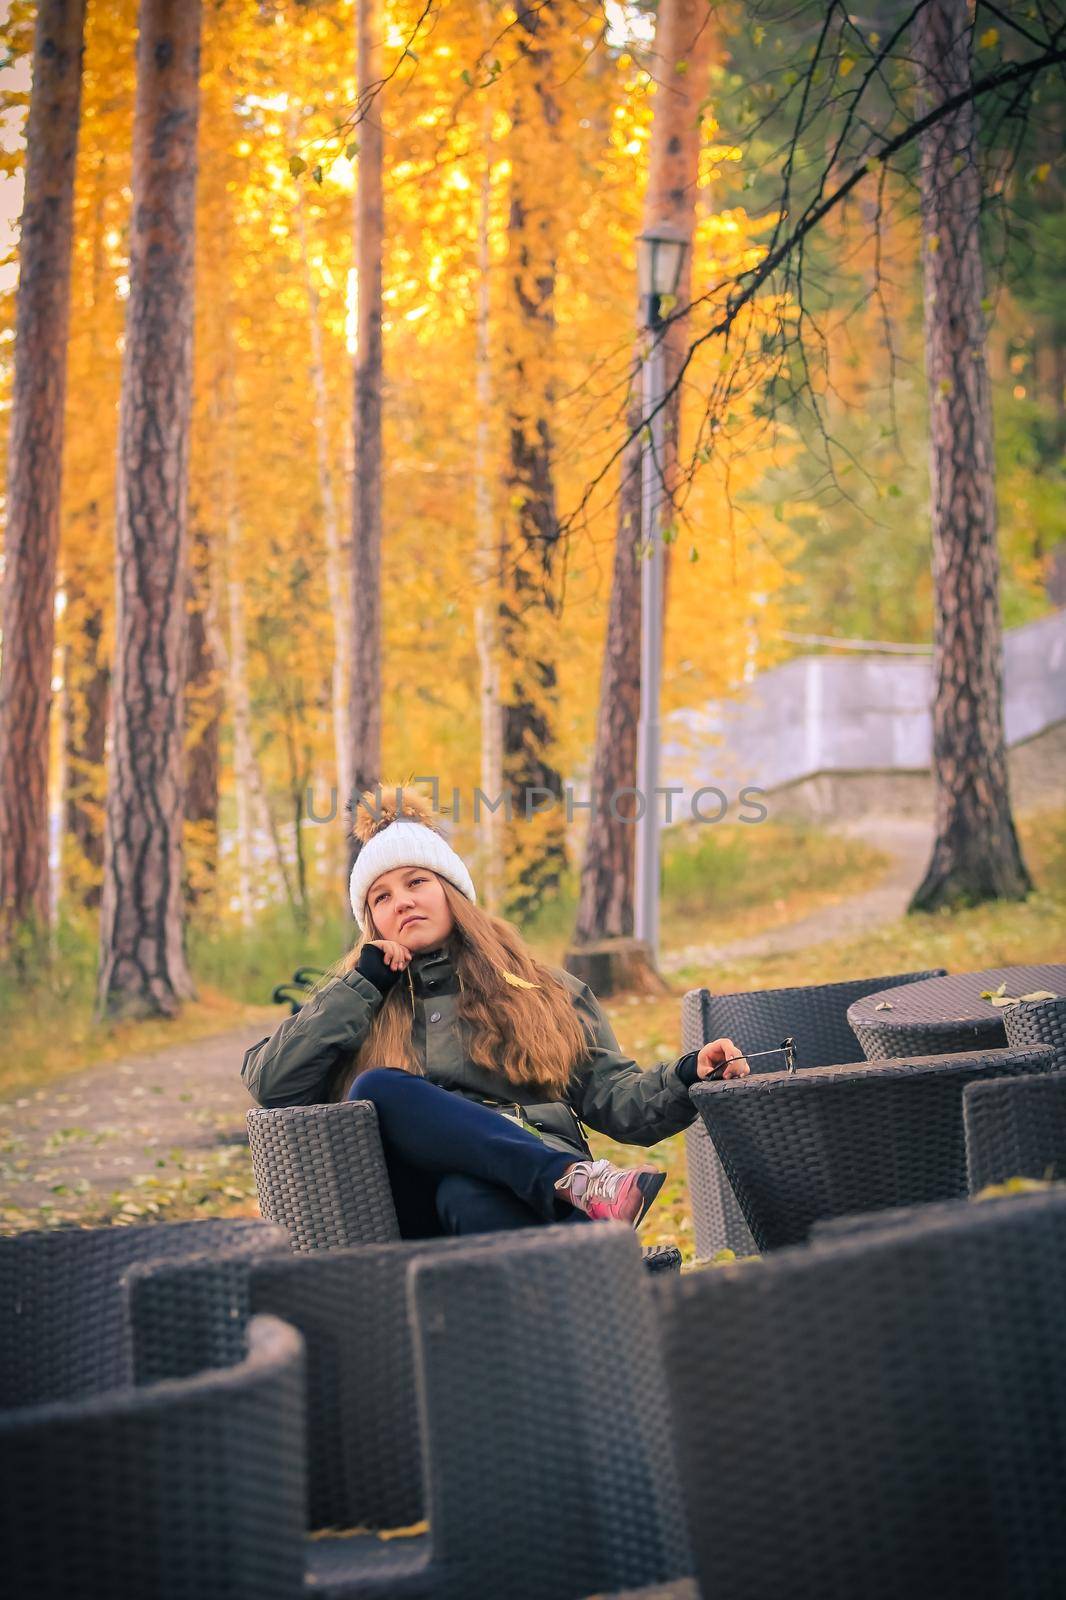 A young girl with long hair sits in a chair in an autumn park.